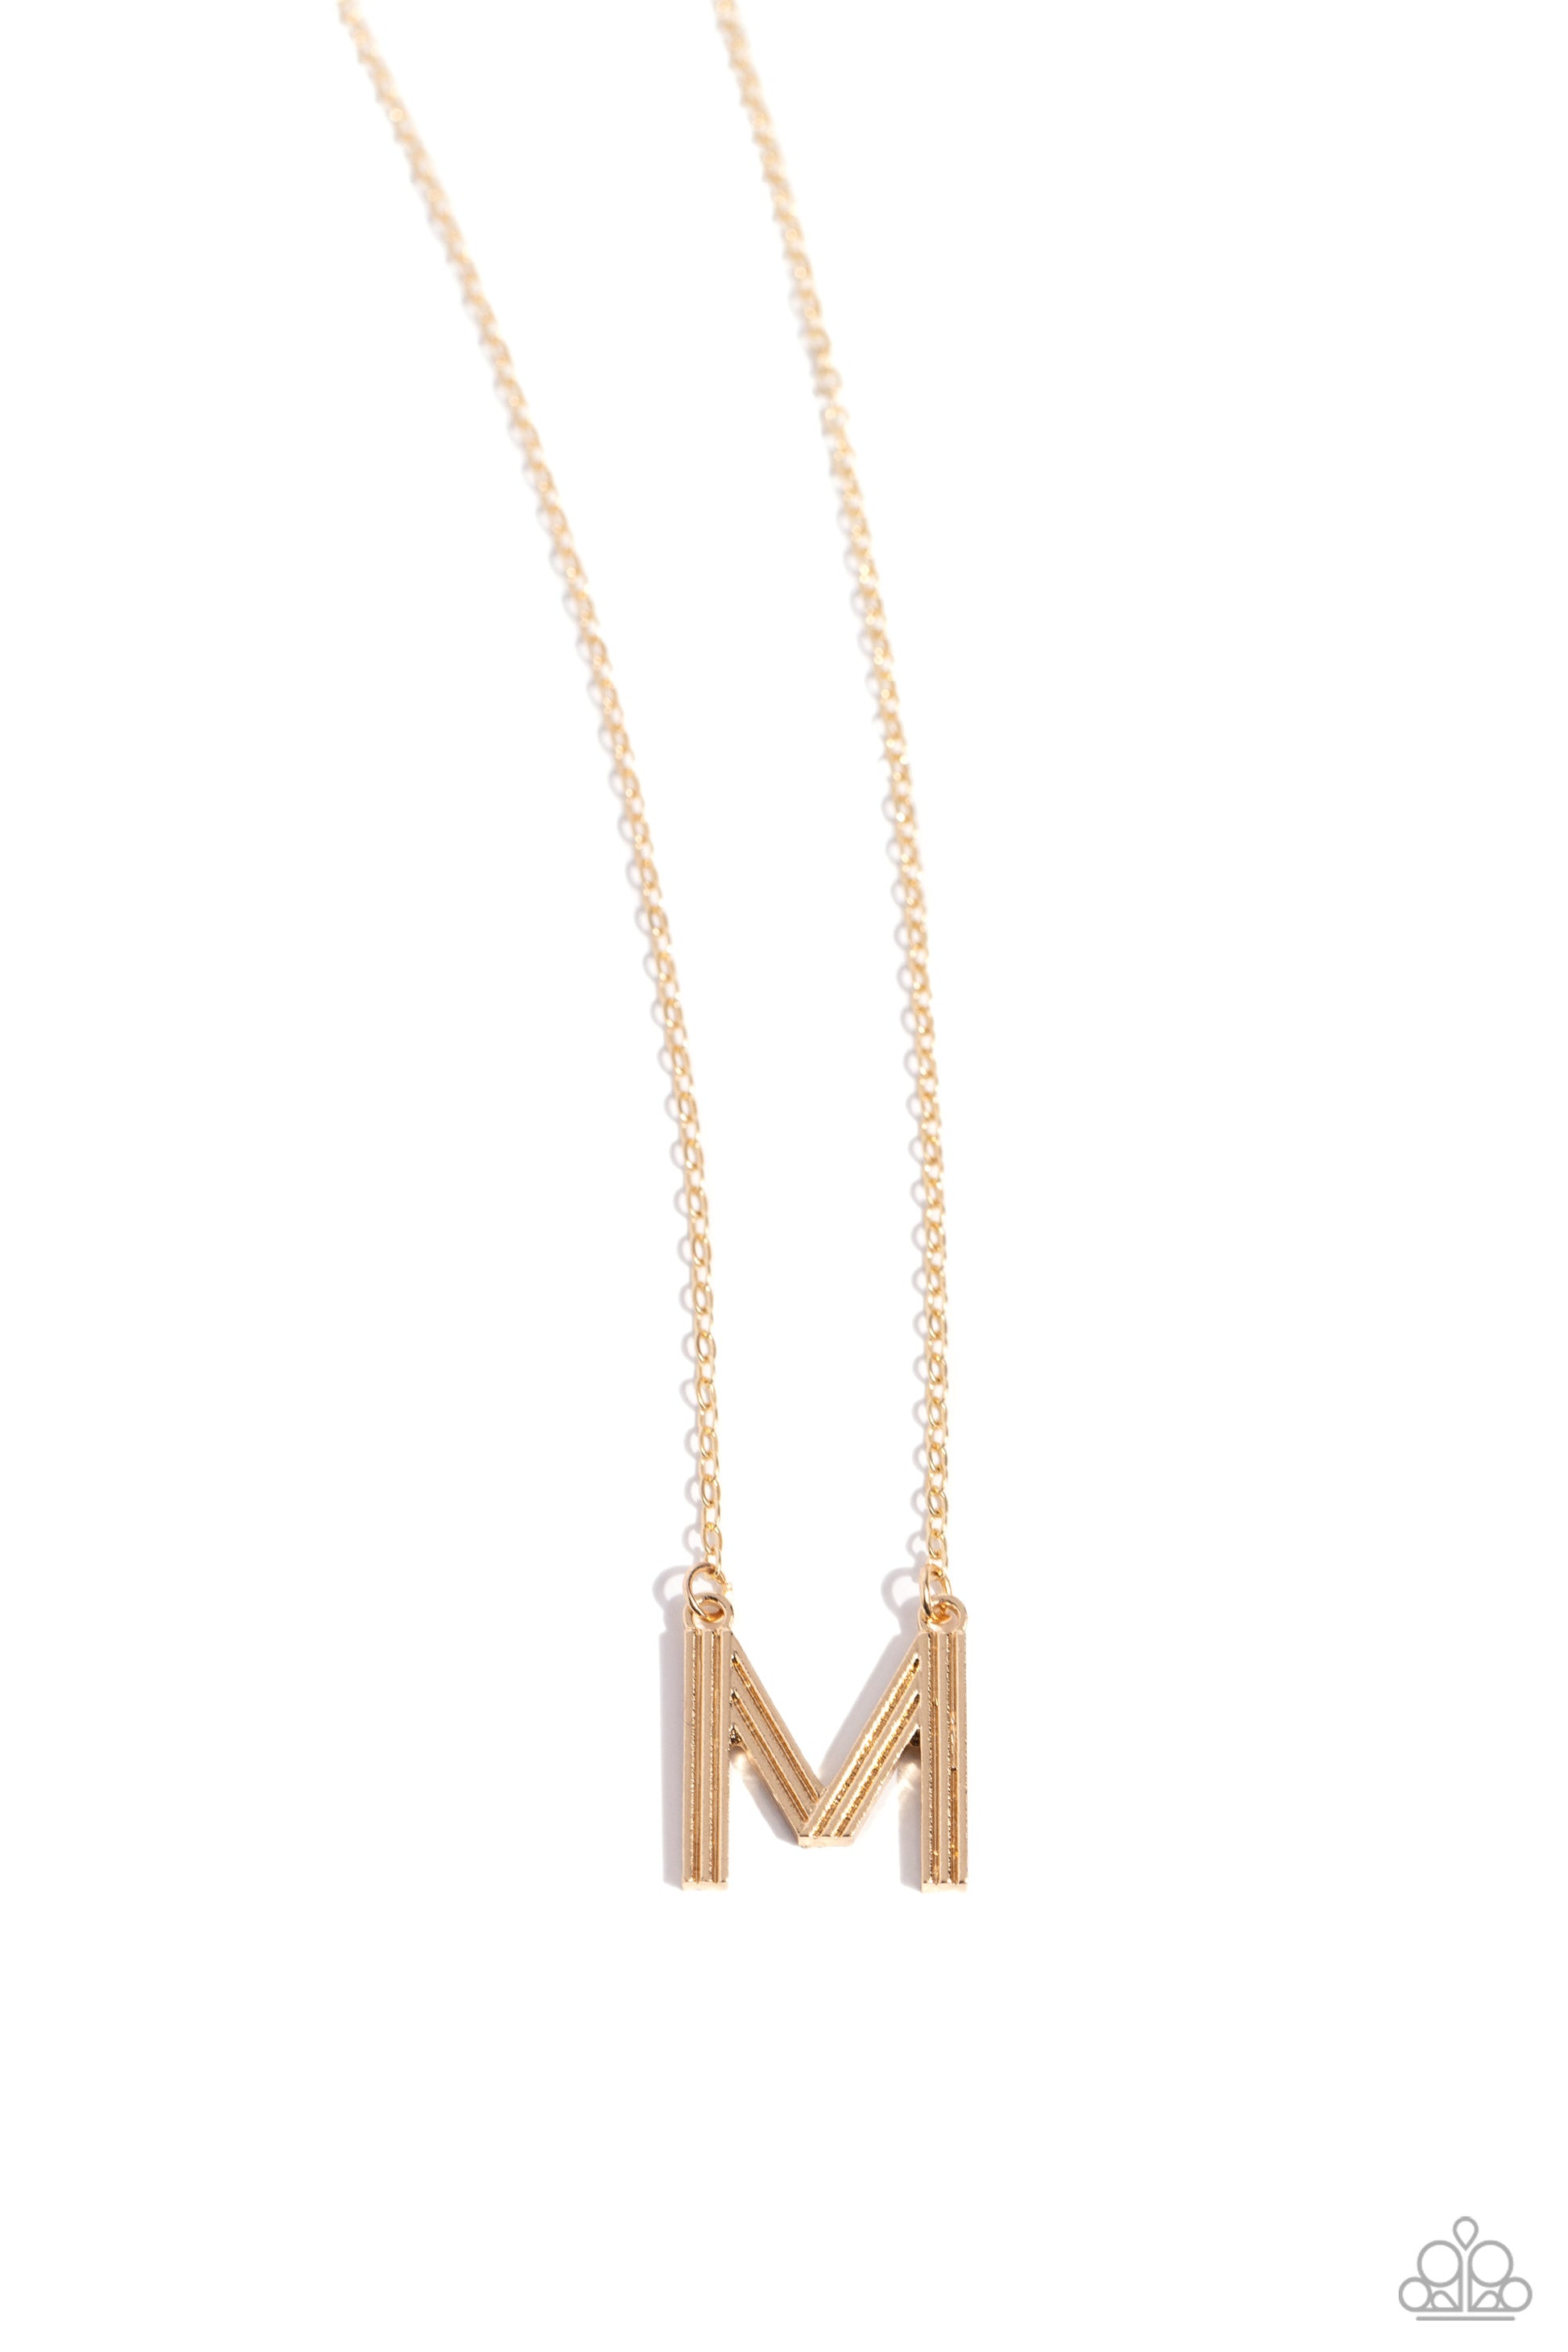 Leave Your Initials - gold - M - Paparazzi necklace